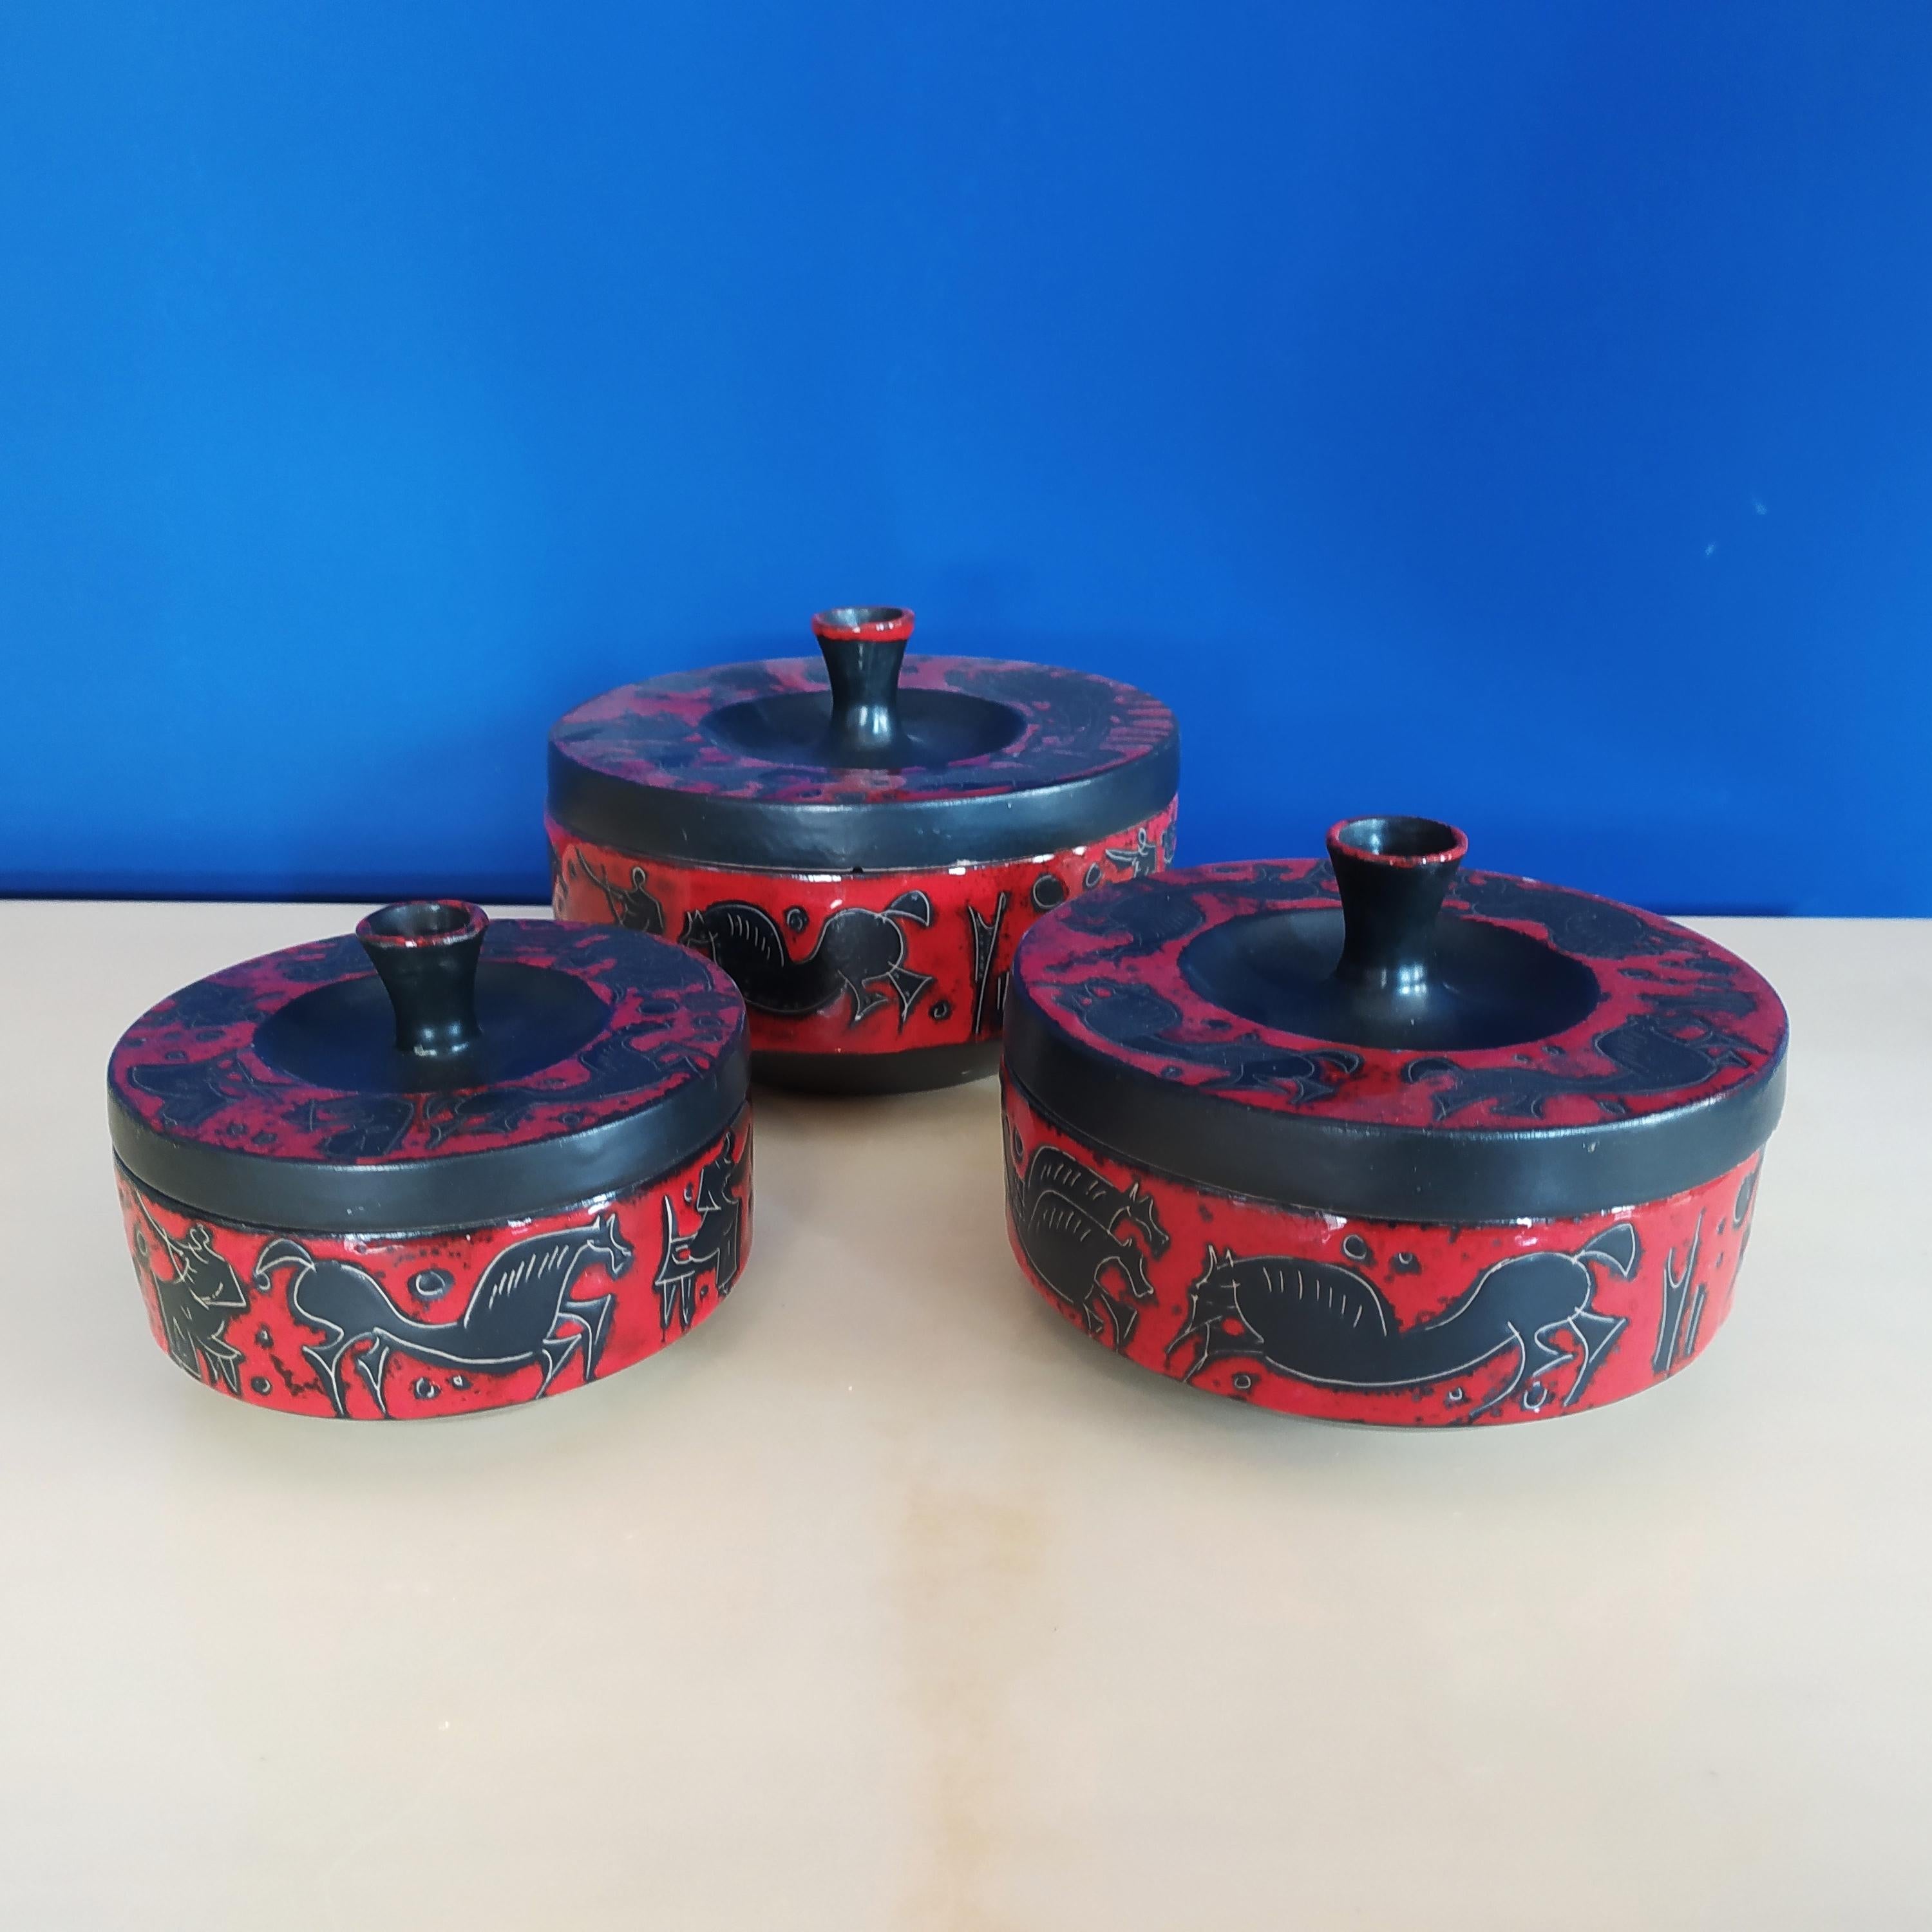 Art Deco 1950s Astonishing Set of 3 Boxes Red and Black in Ceramic